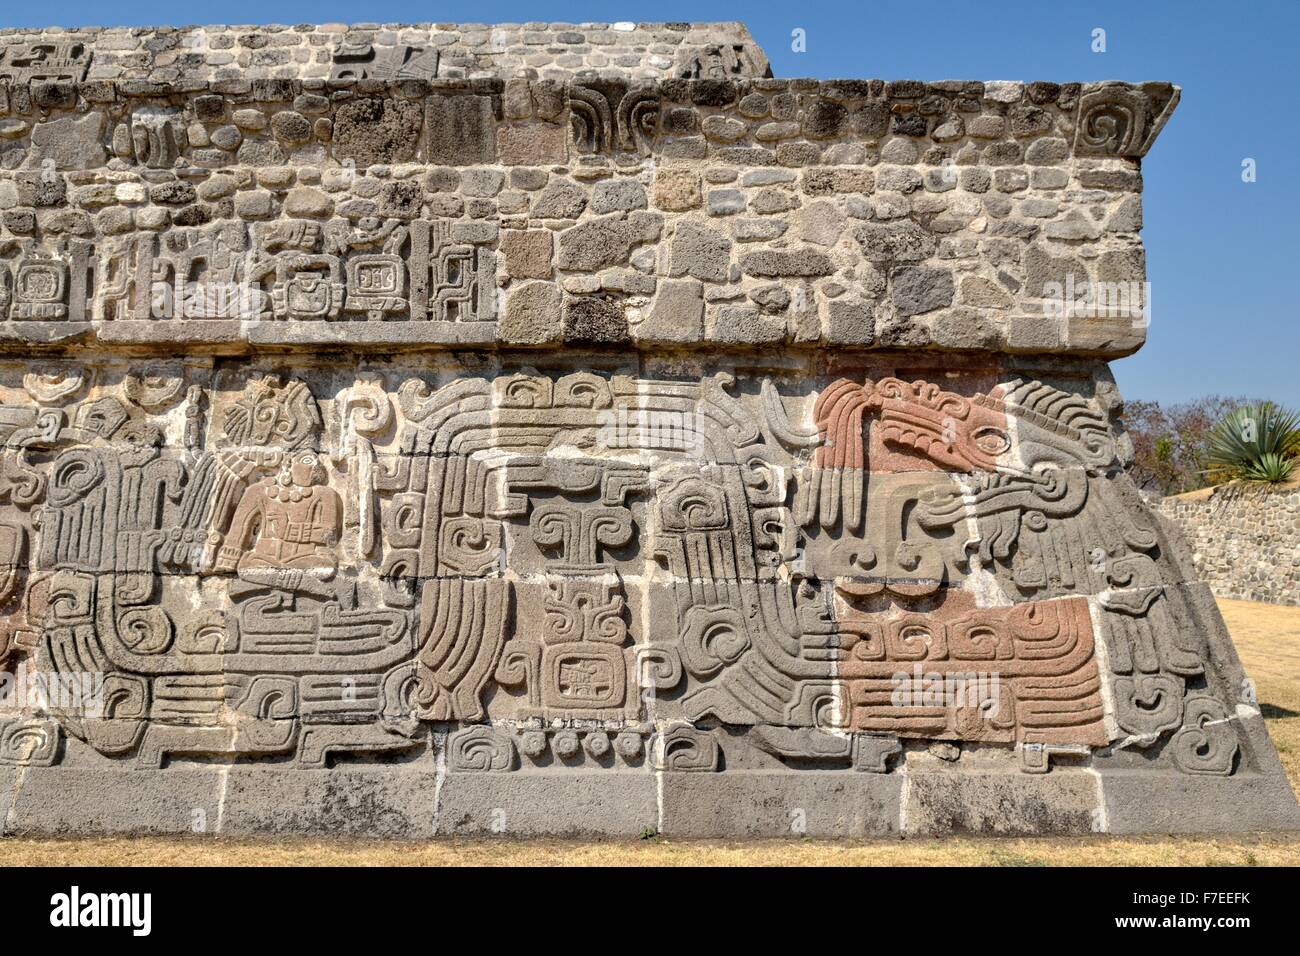 Pyramid of the Feathered Serpents, details, Ruins of Xochicalco, Cuernavaca, Morelos, Mexico Stock Photo